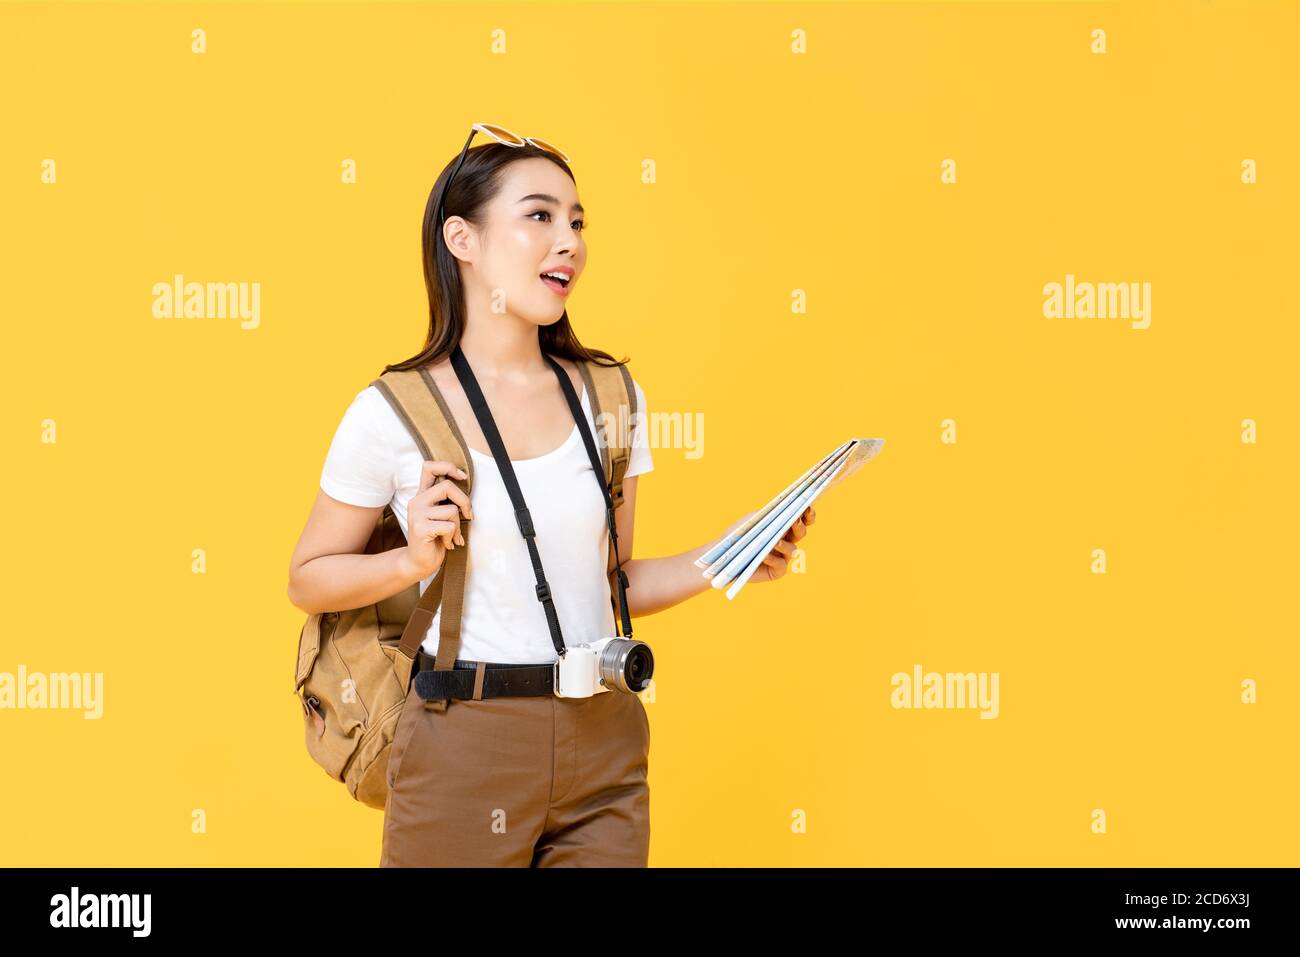 Travel concept portrait of young backpacker Asian woman tourist holding map while looking away in isolated studio yellow background Stock Photo